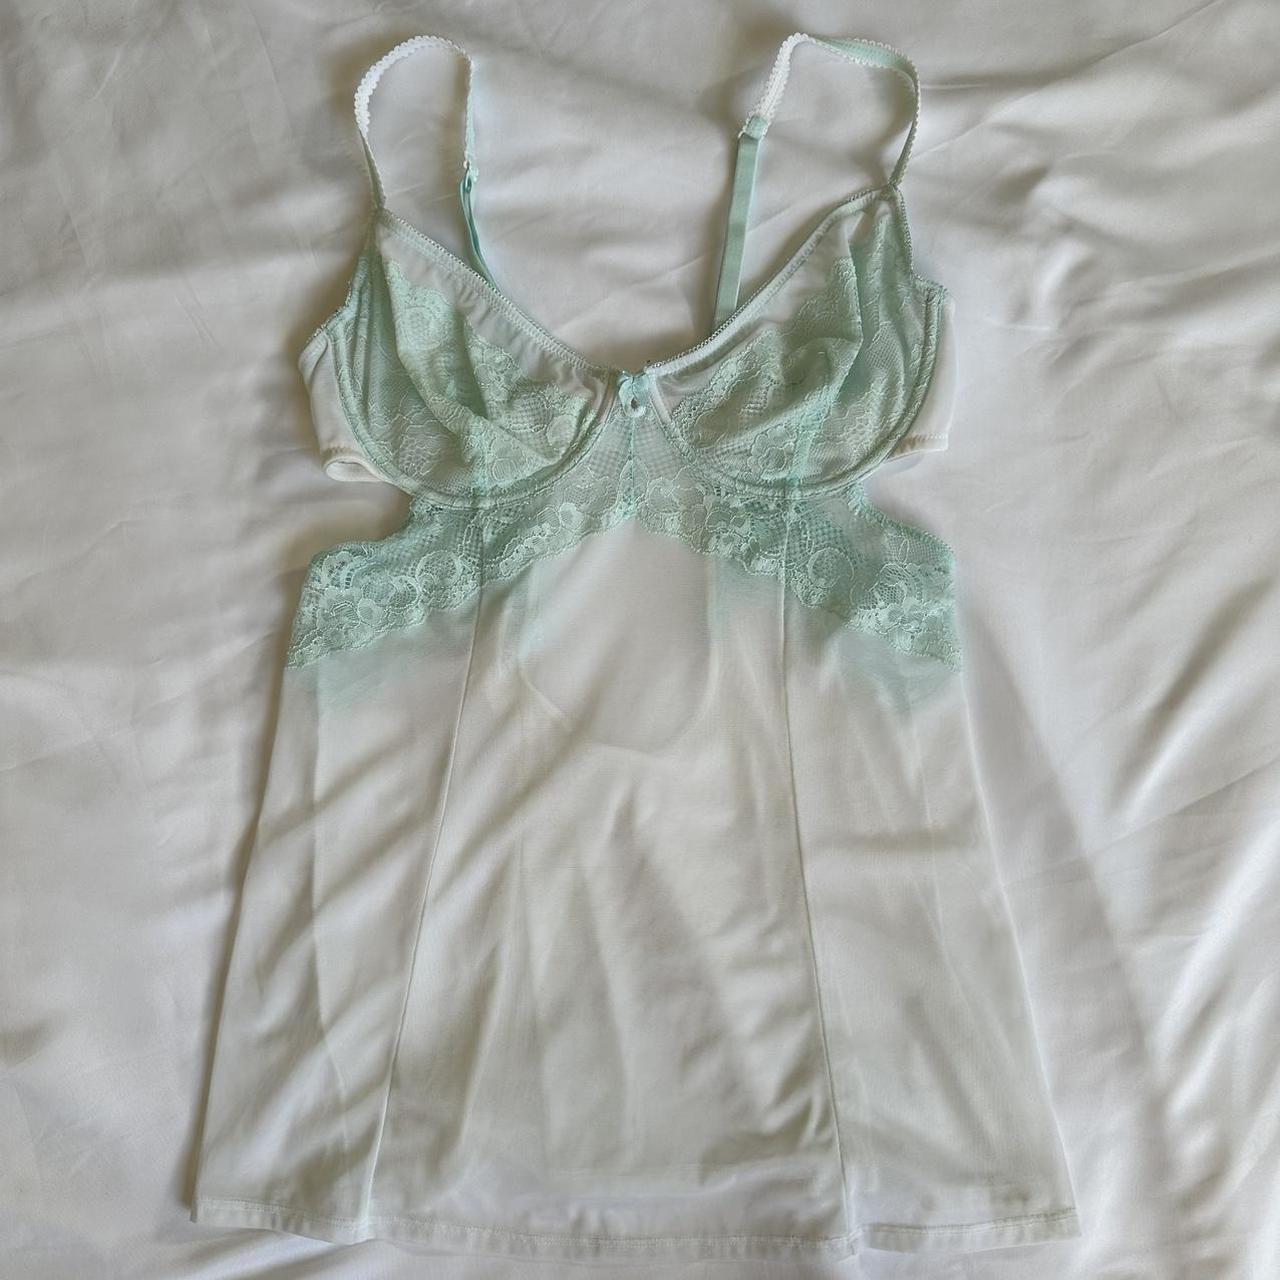 Gilligan & O'Malley bustier top 36b cup size Fits - Depop